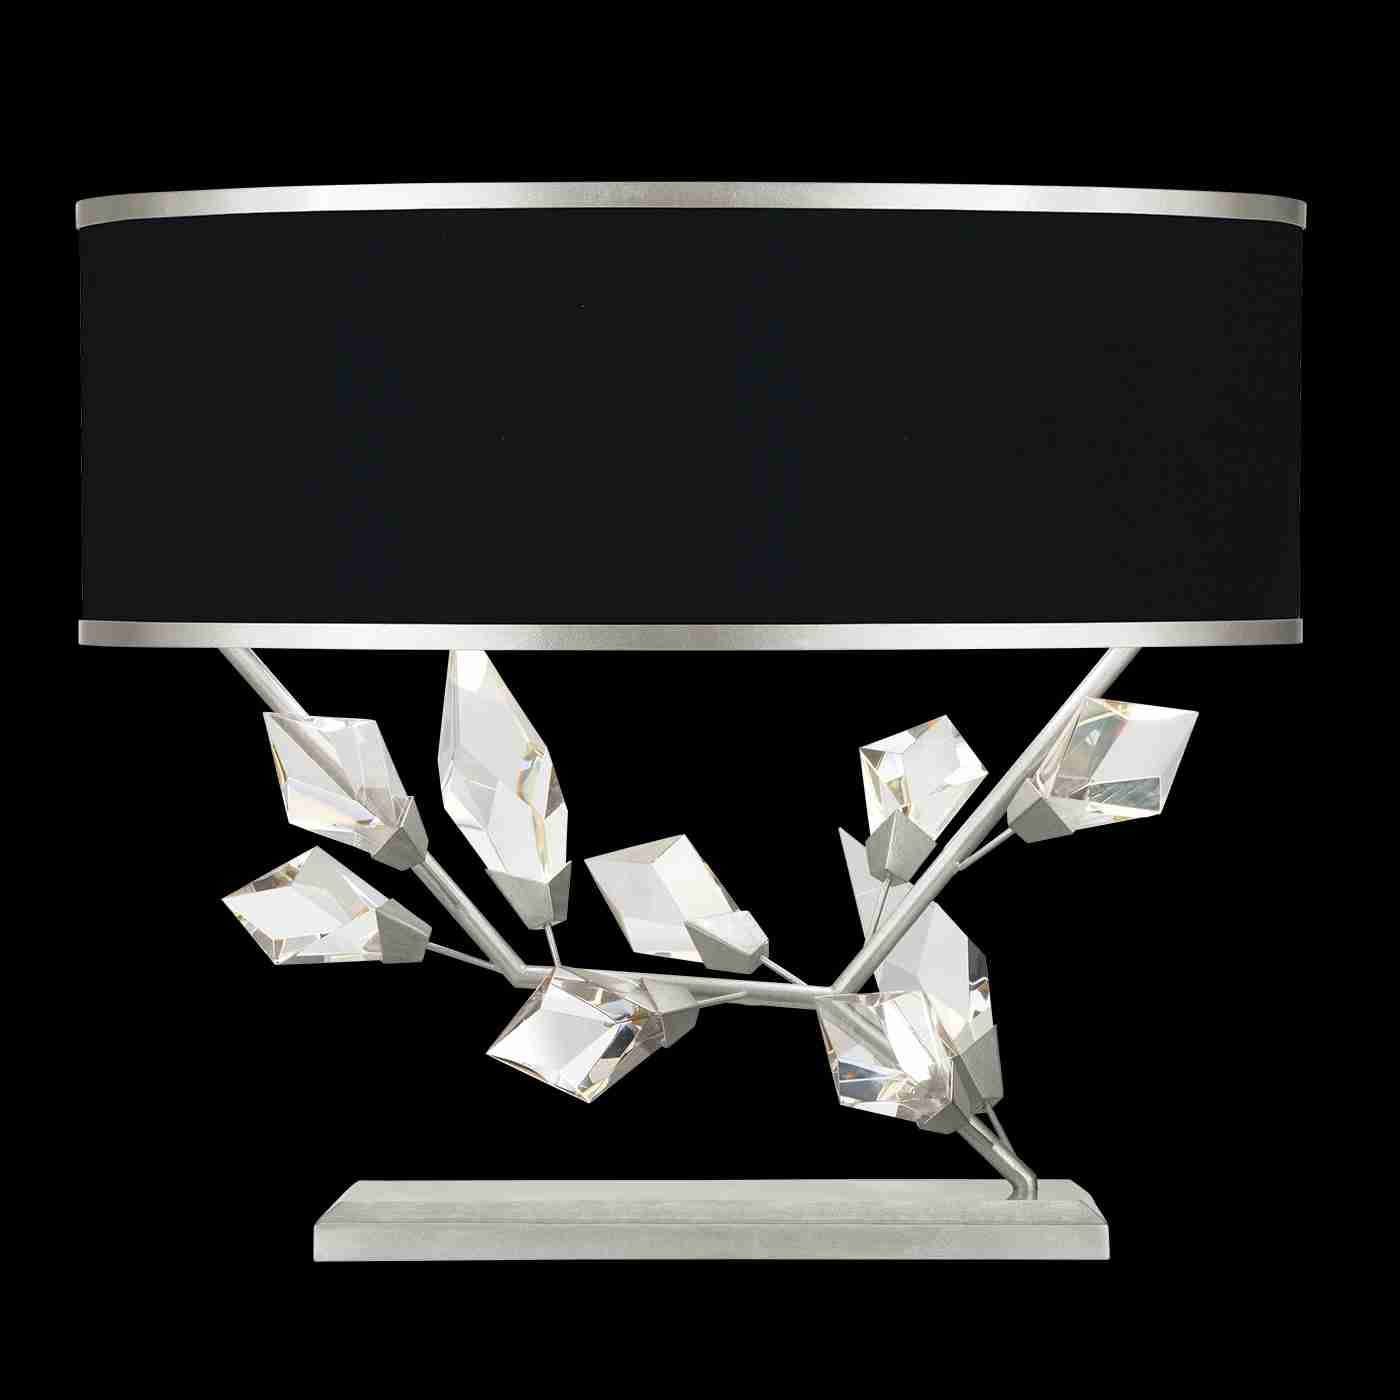 Foret Table Lamp Silver with Black Shade